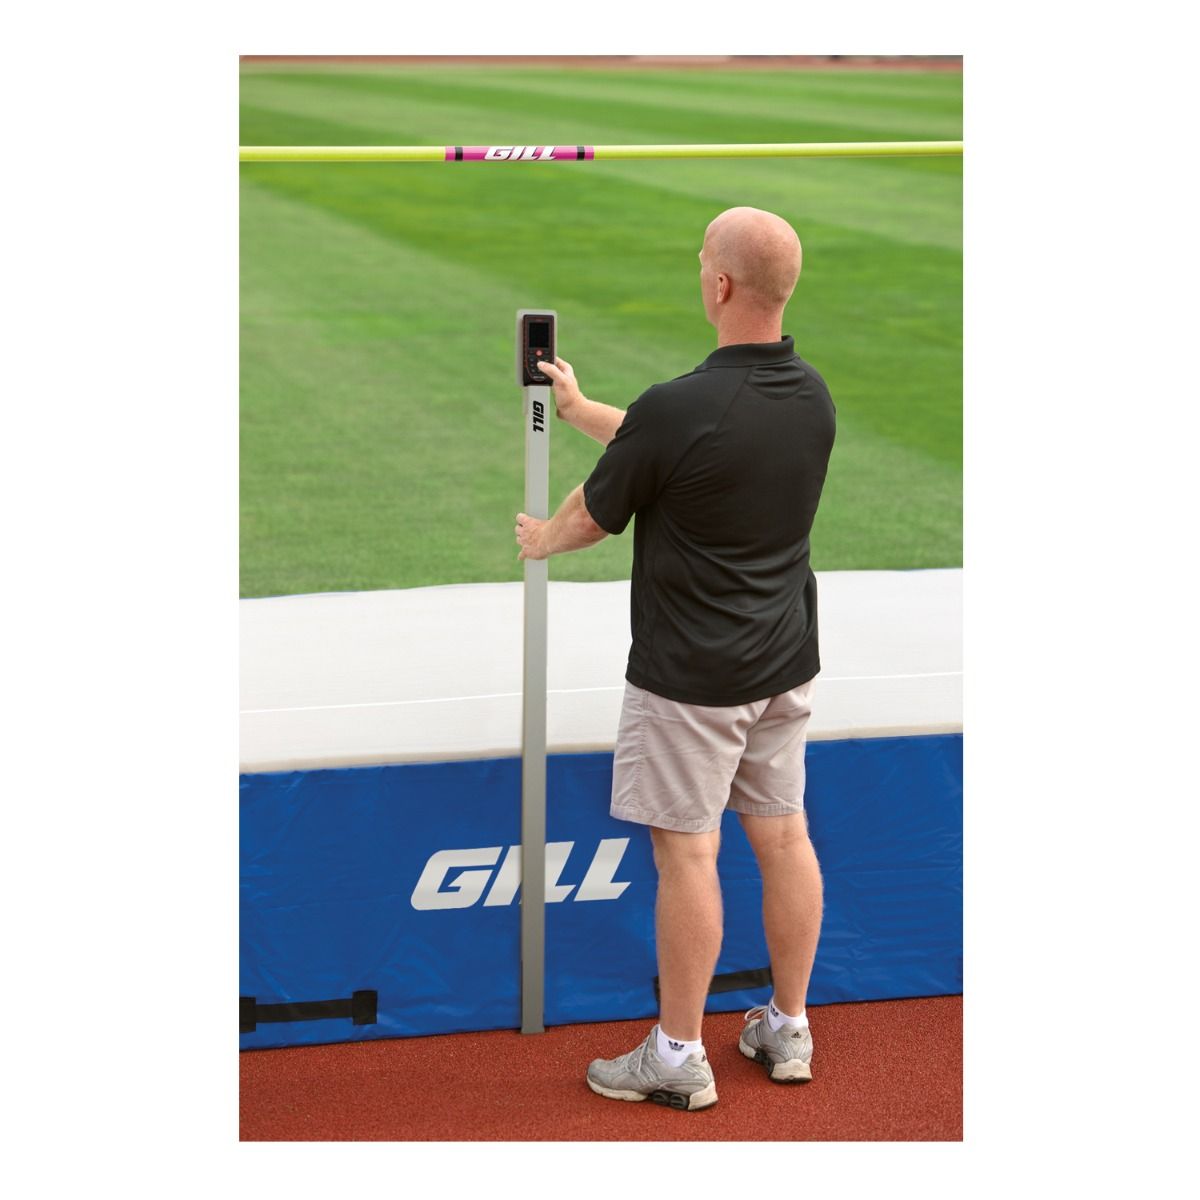 Gill Measuring Laser with Aluminum Stick for Pole Vault and High Jump